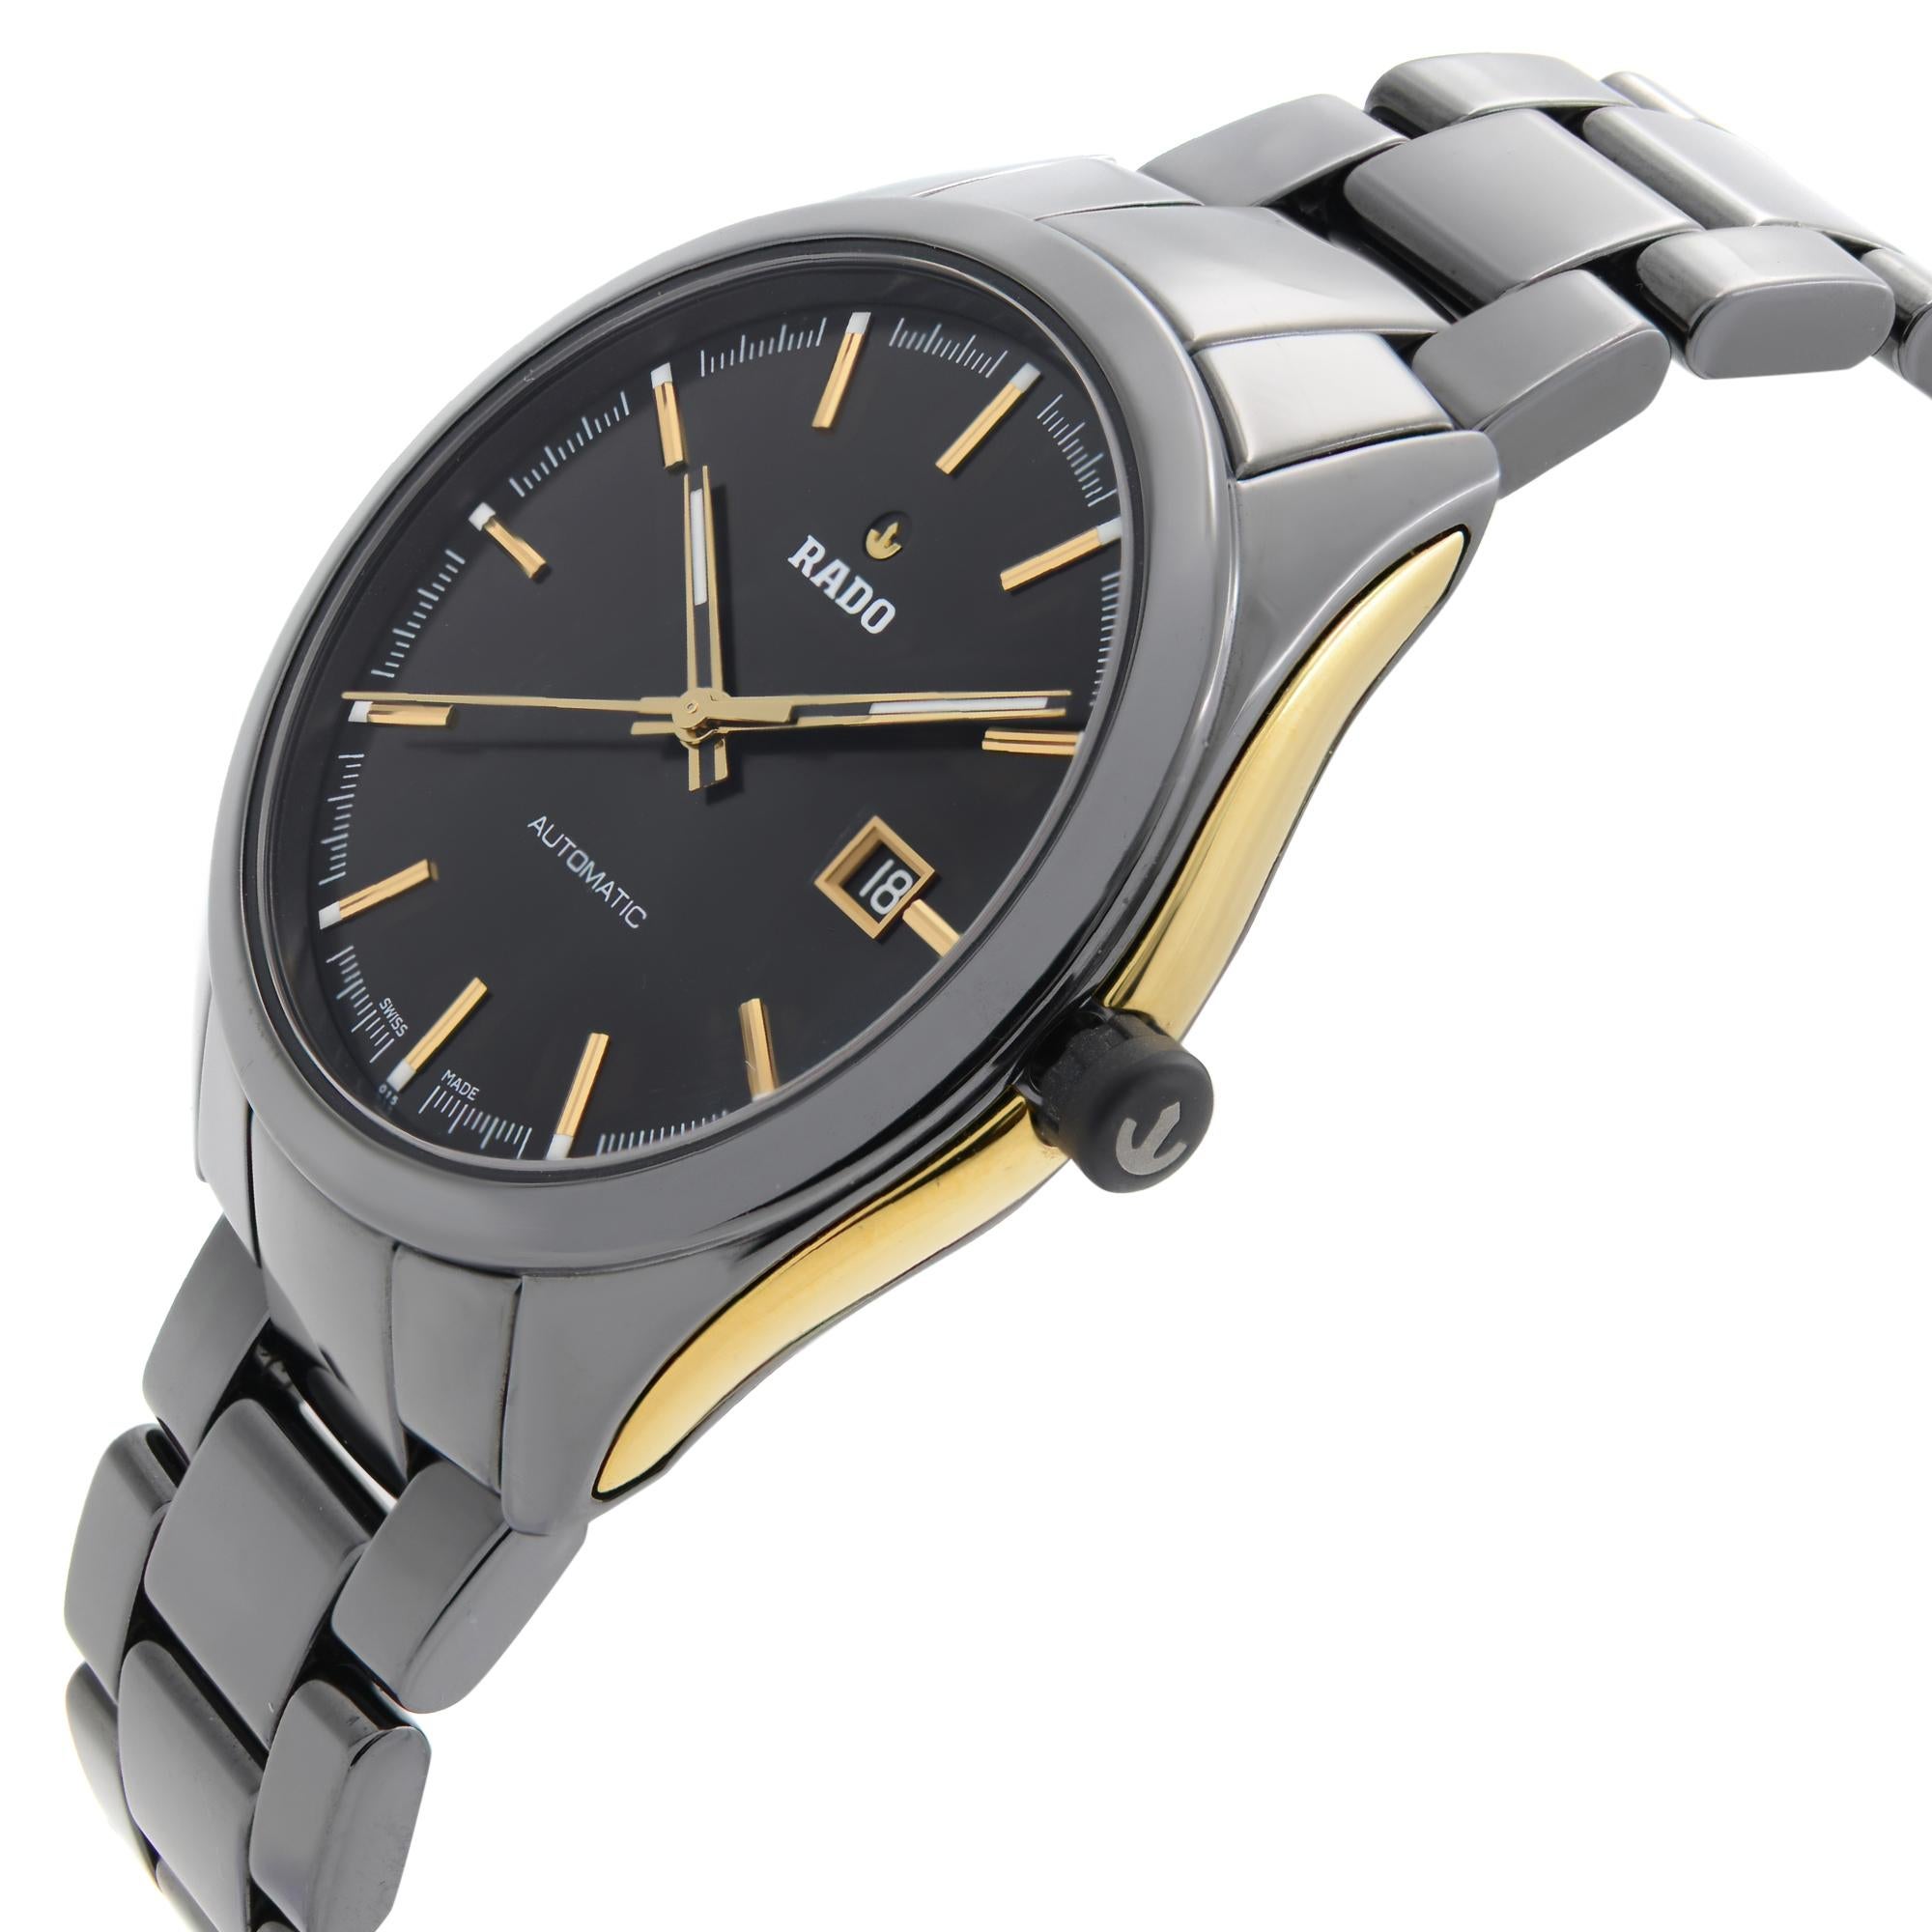 rado chronometer officially certified 100m price in india